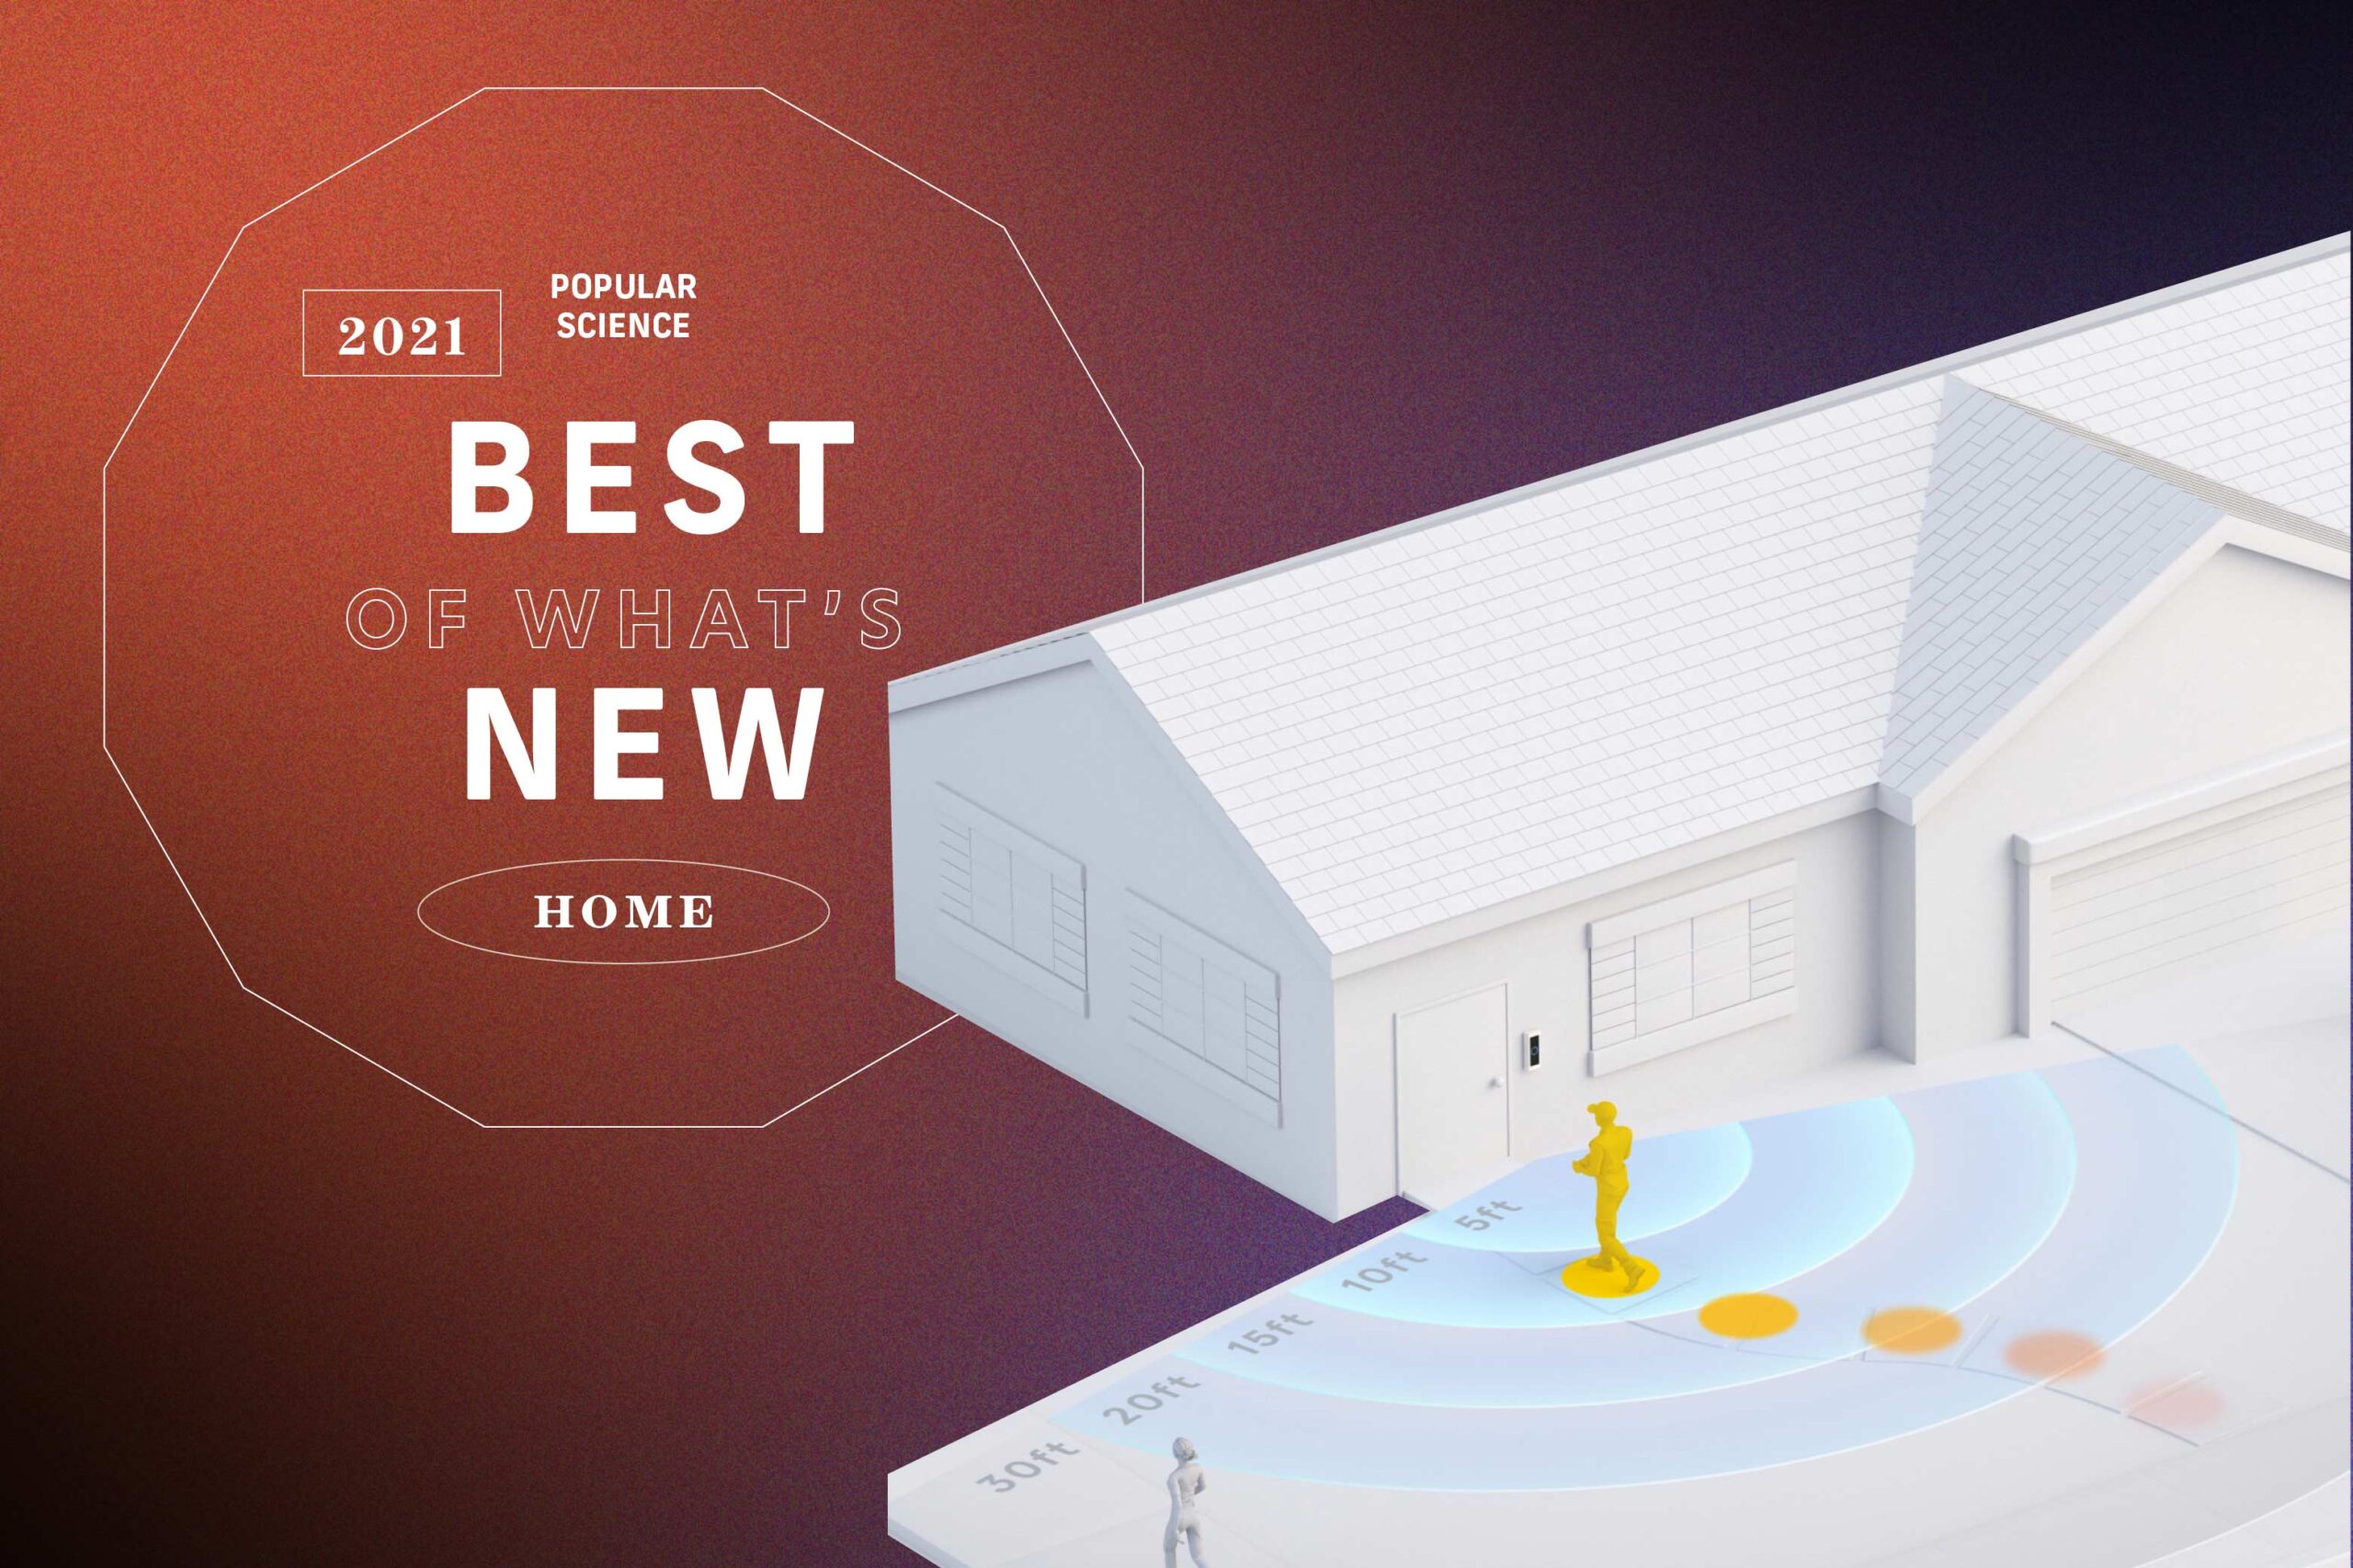 Popular Science presents the Best of What's New for home products in 2021.